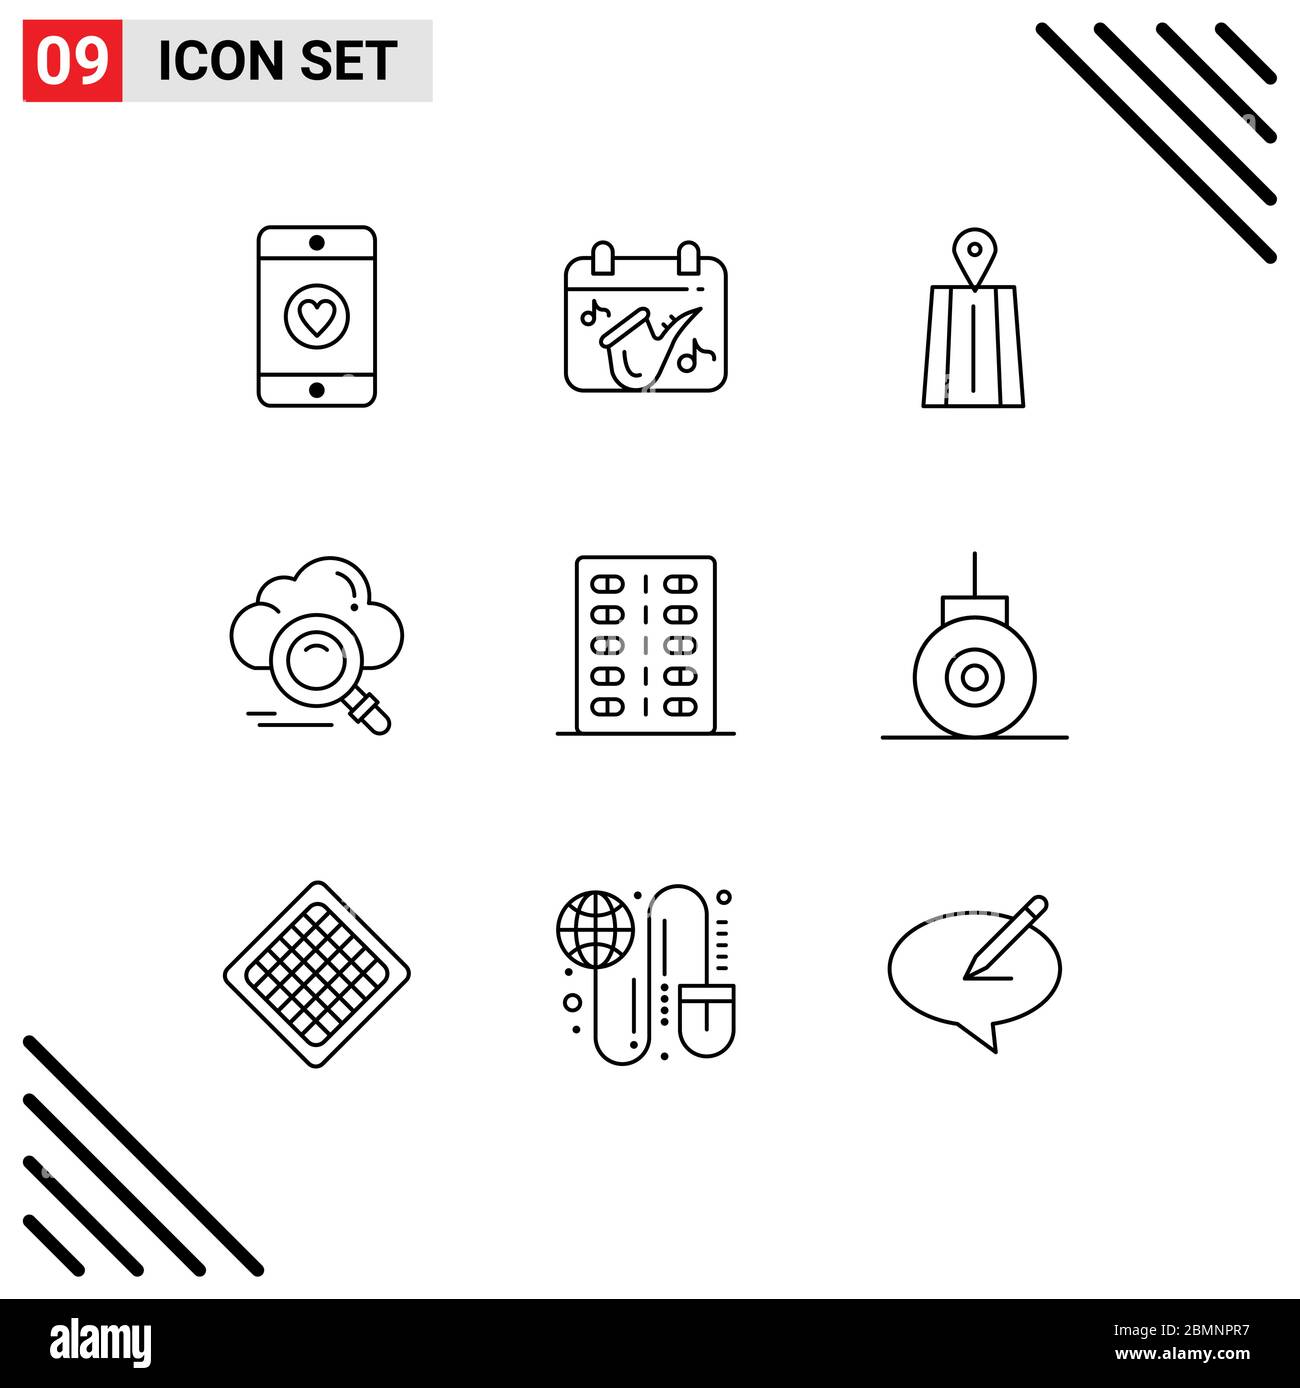 Set of 9 Modern UI Icons Symbols Signs for fitness, disease, road, access, data Editable Vector Design Elements Stock Vector